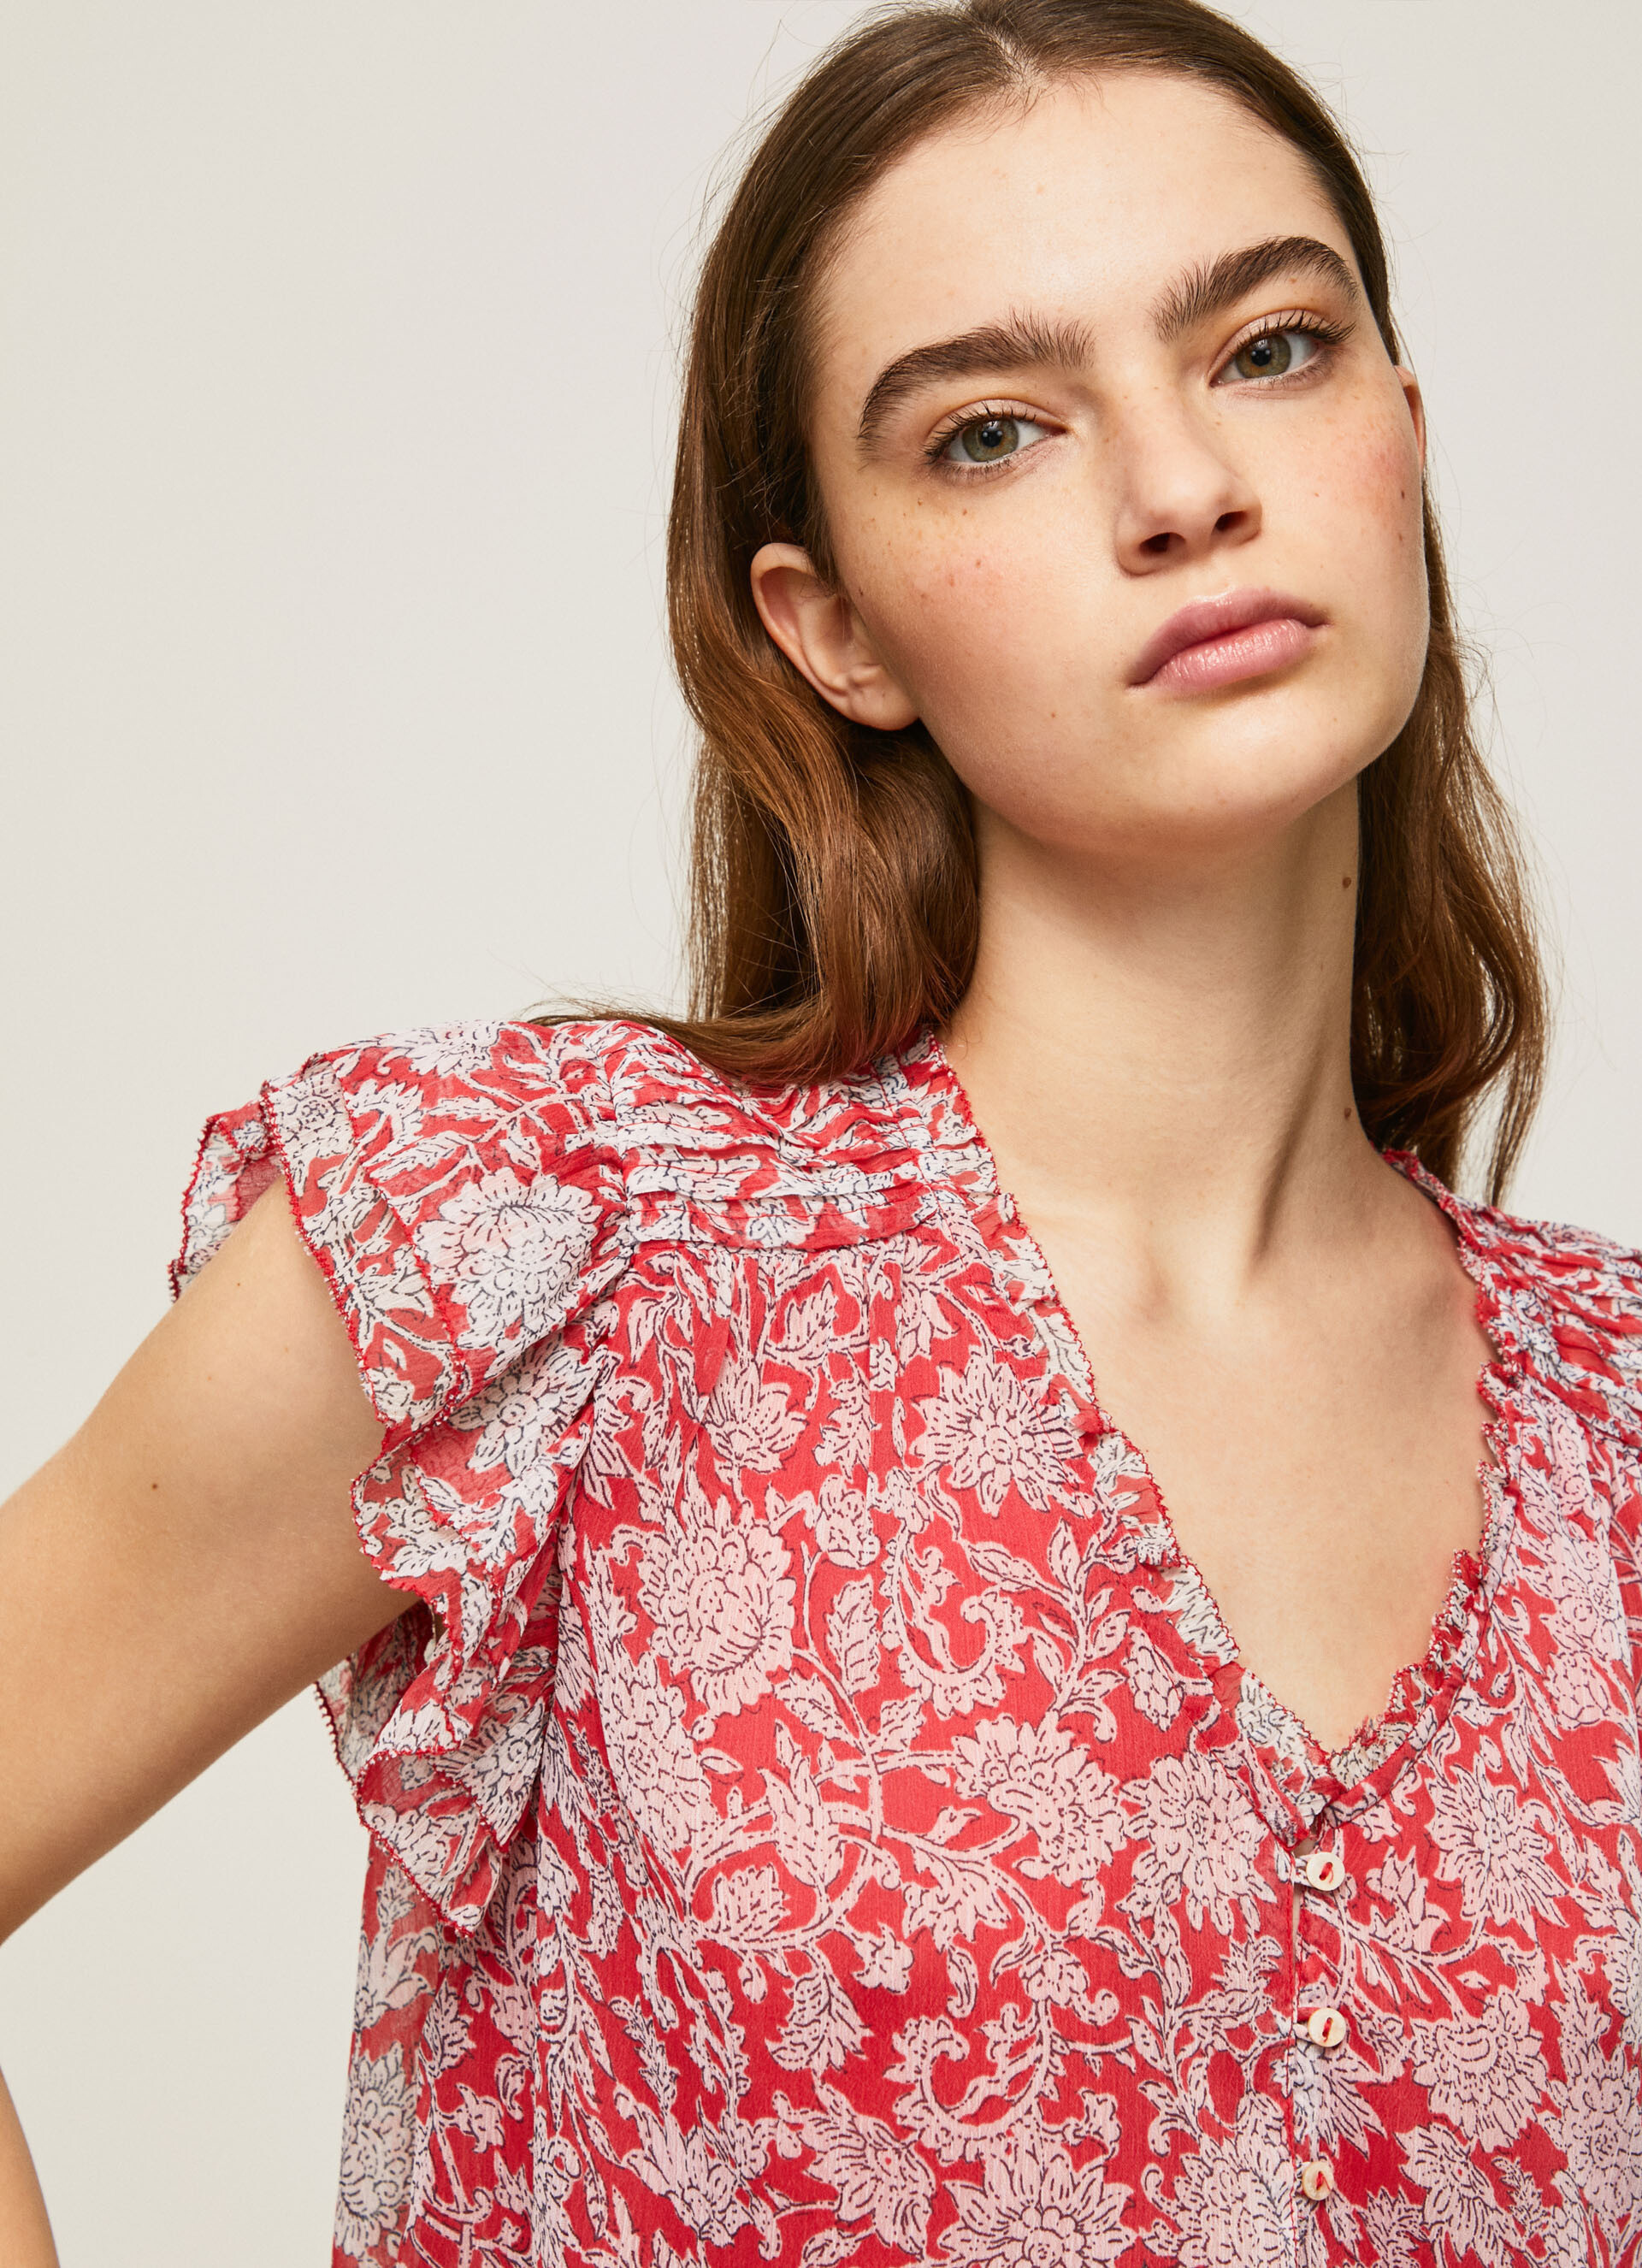 Pepe Jeans - Patterned top, Red, large image number 2